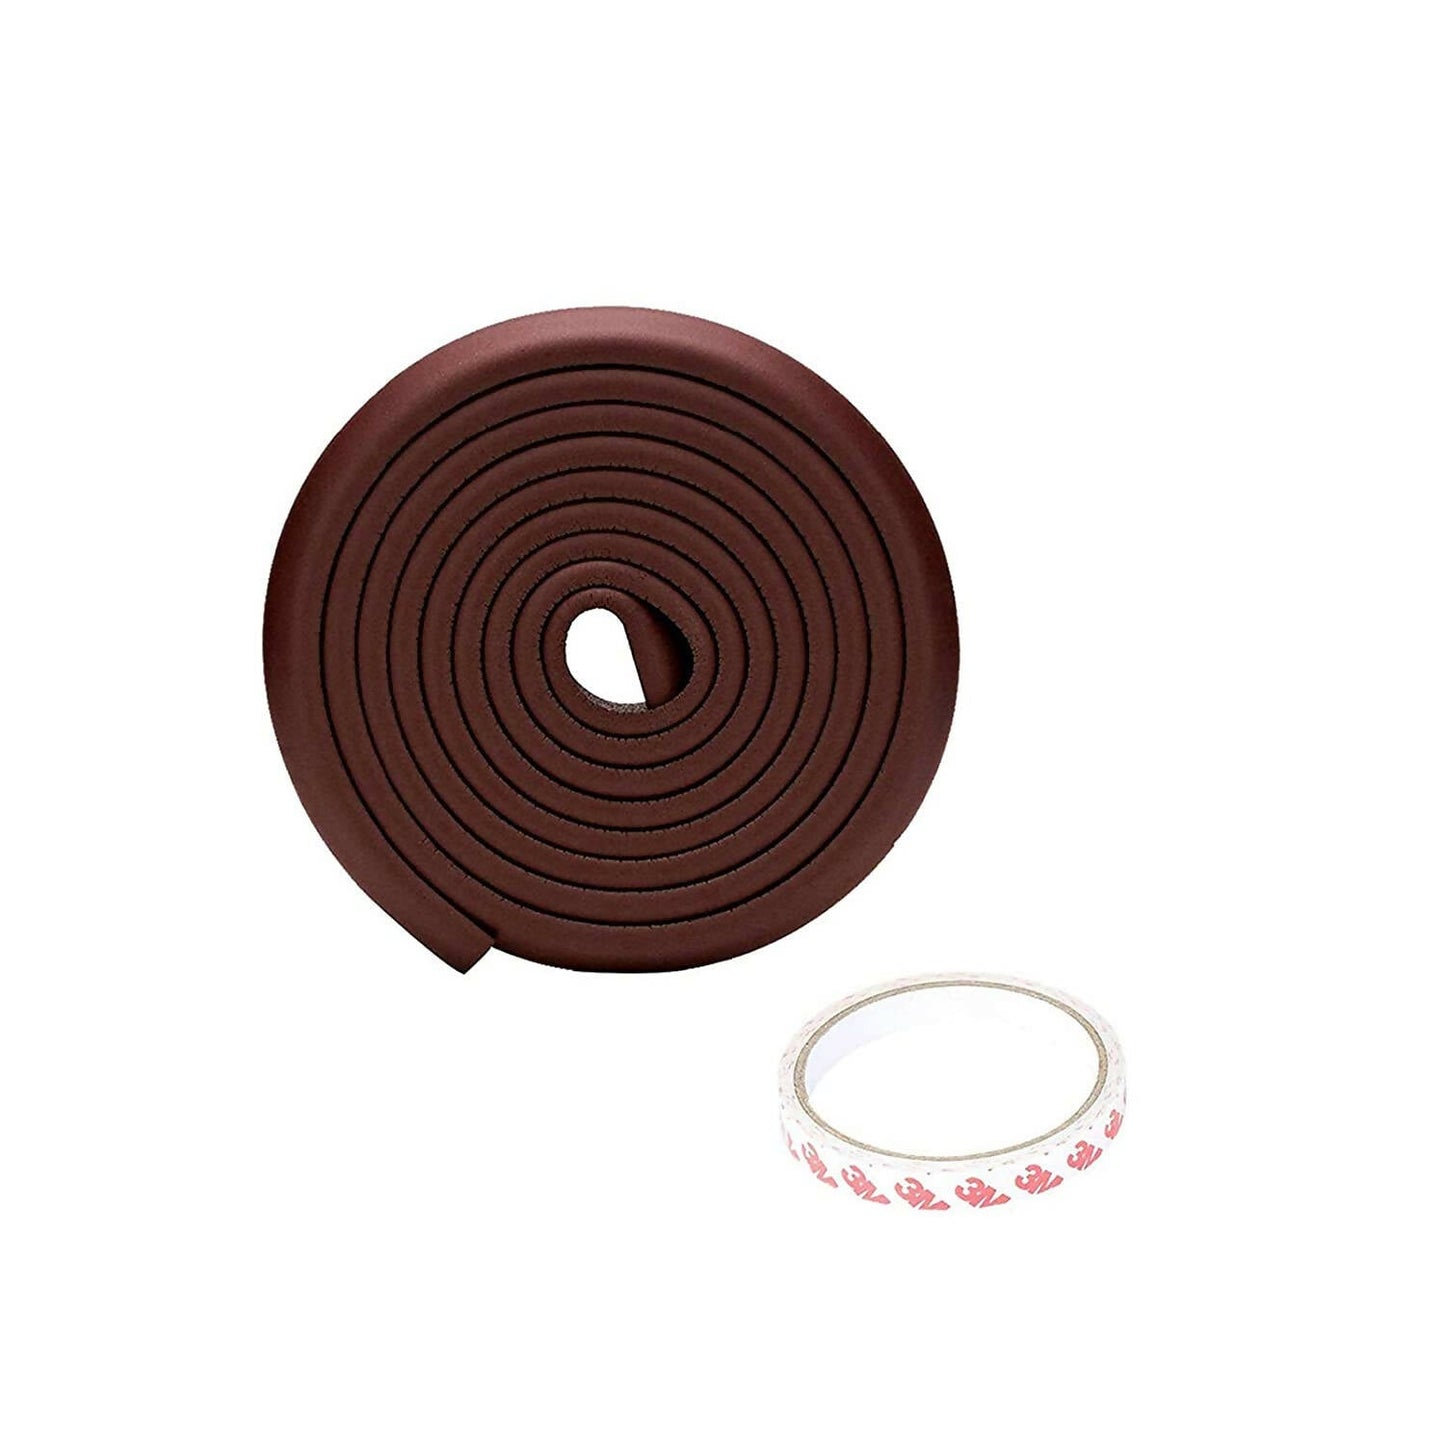 Safe-O-Kid Edge Guards 5 Mtr, Brown For Kids Protection